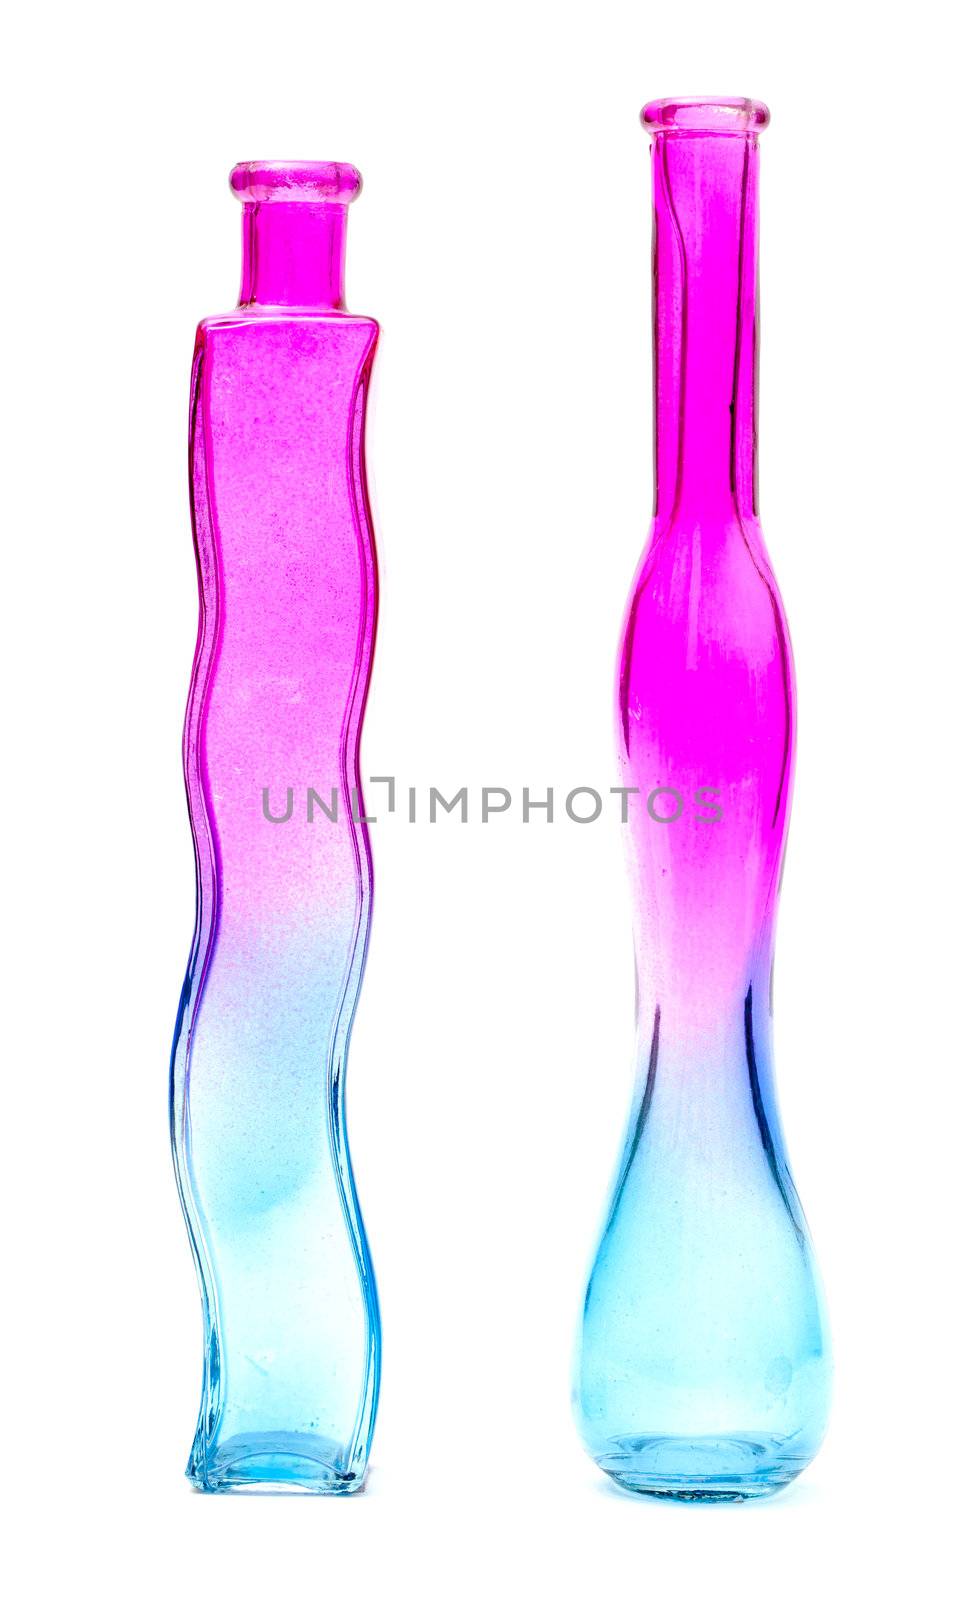 Multicolored Decorative Bottles by Discovod